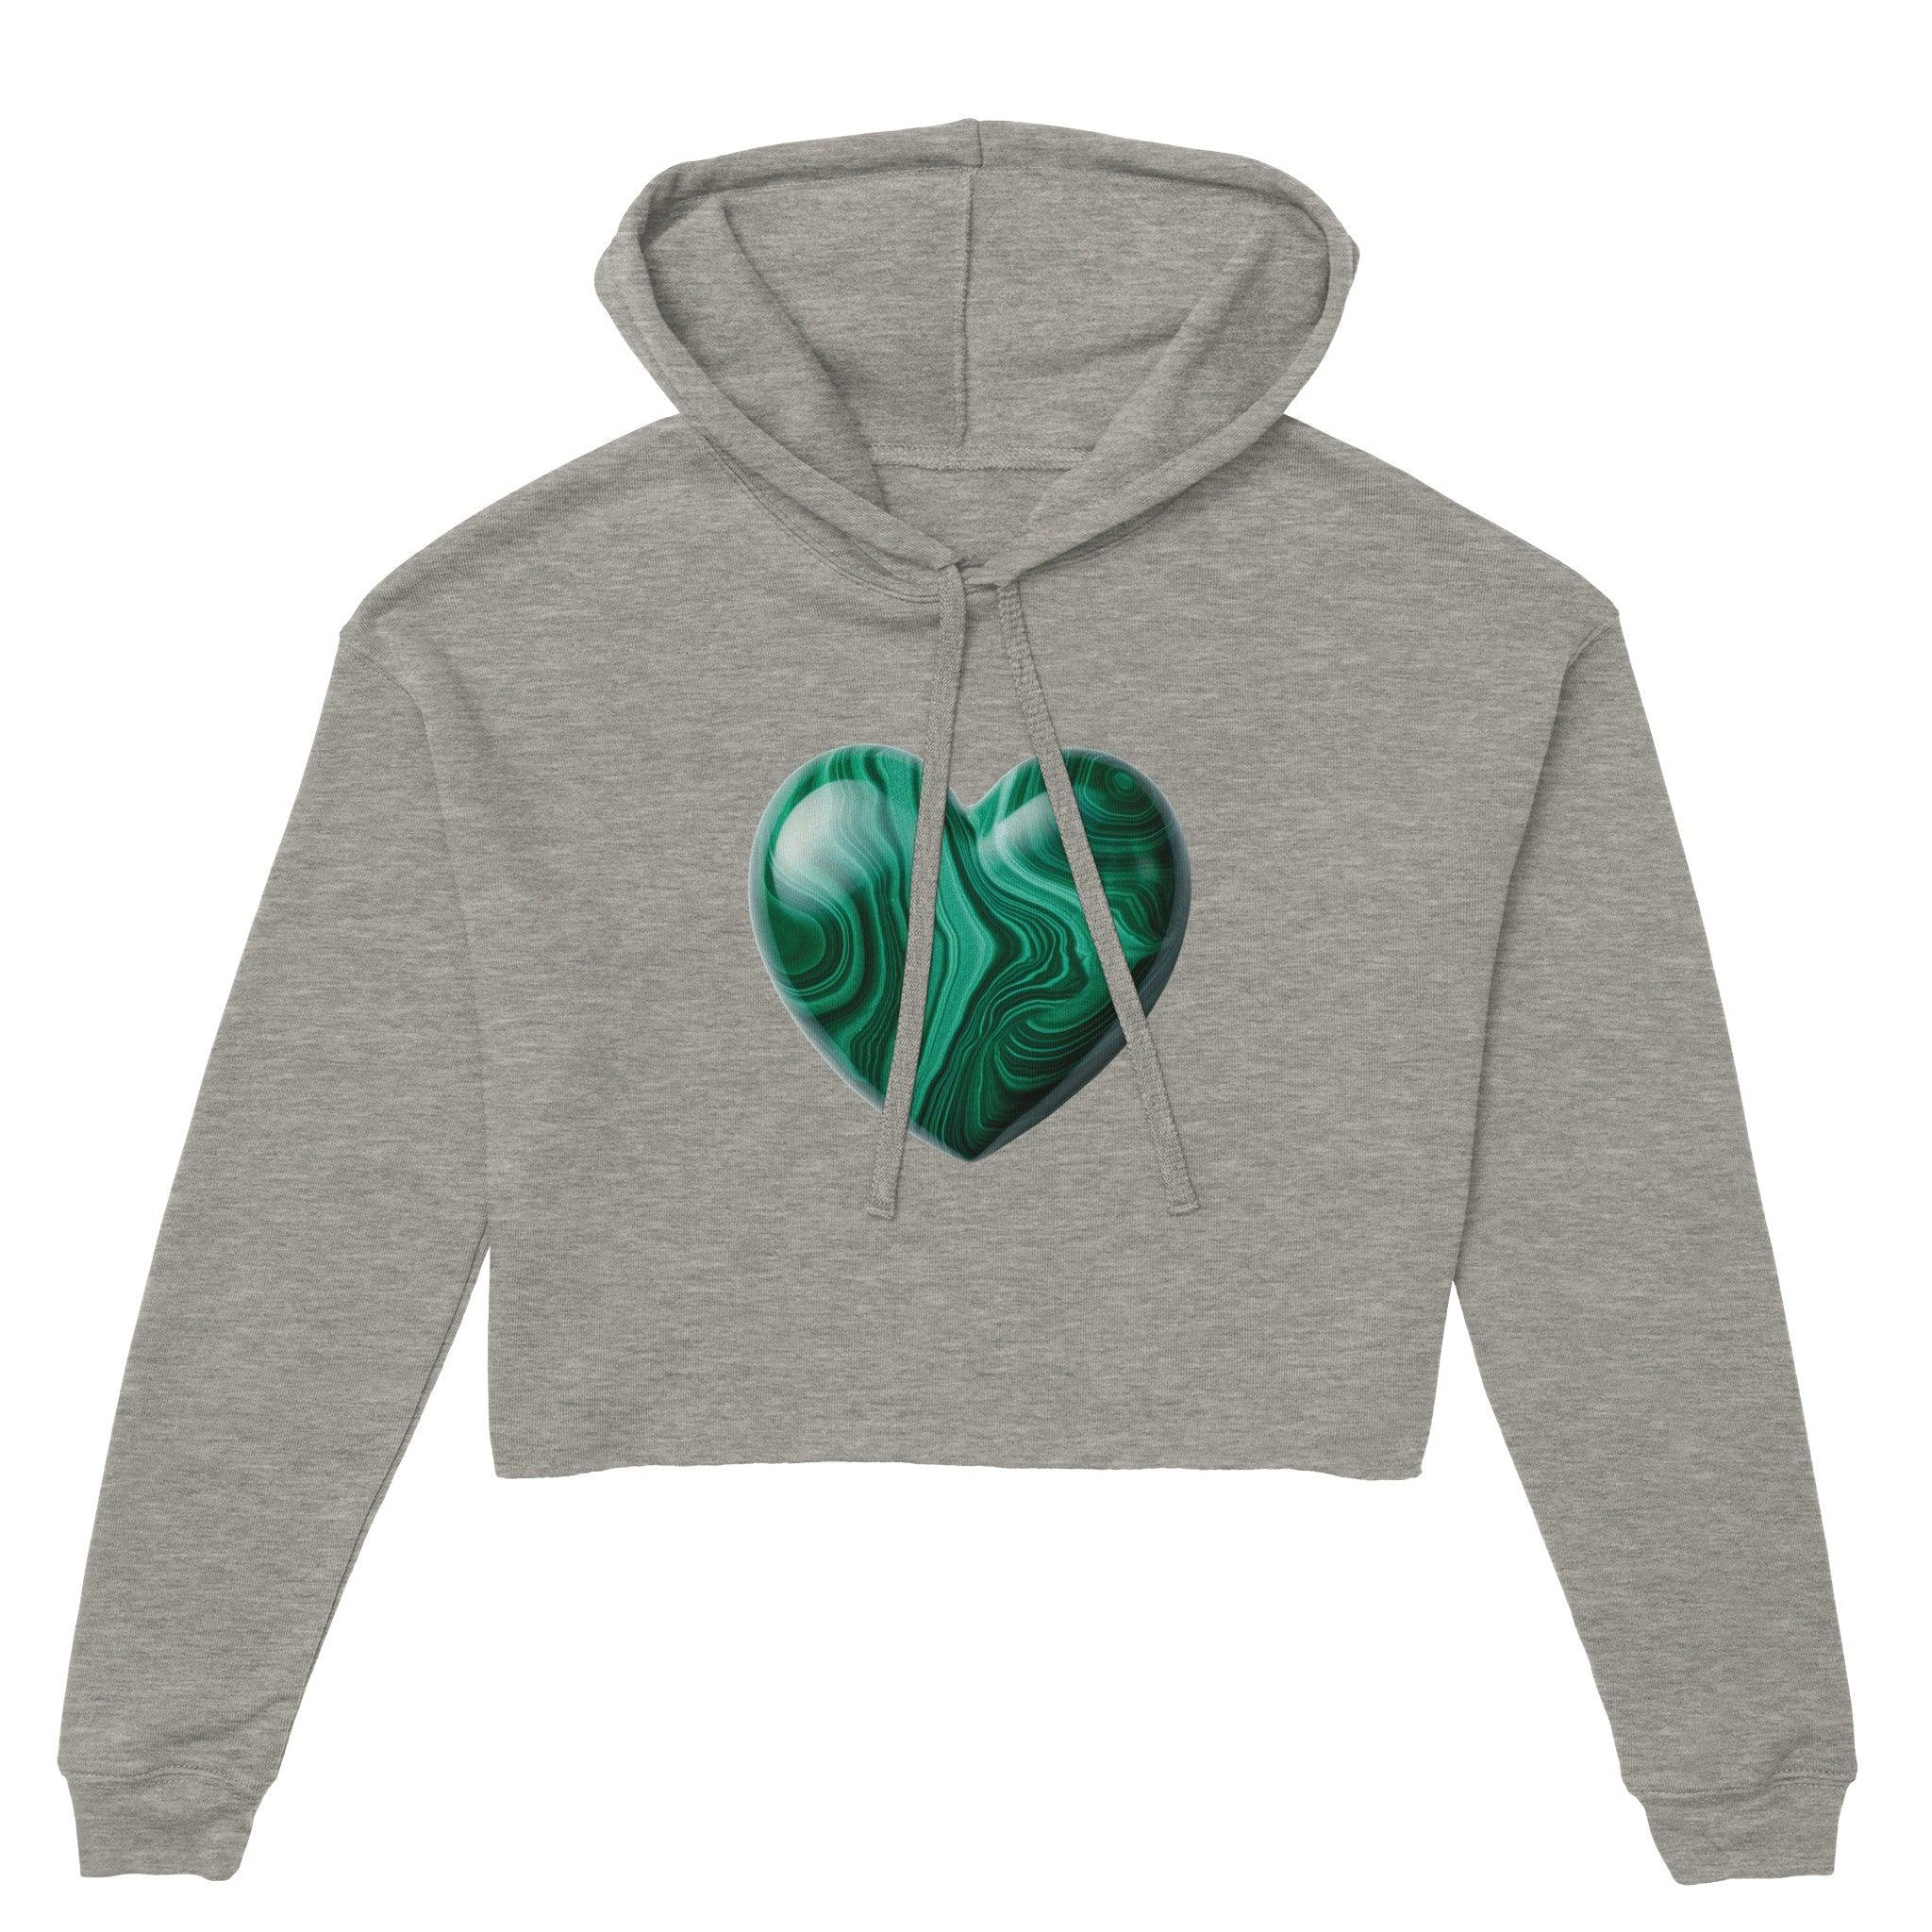 'Heart of stone' Cropped Hoodie - POMA